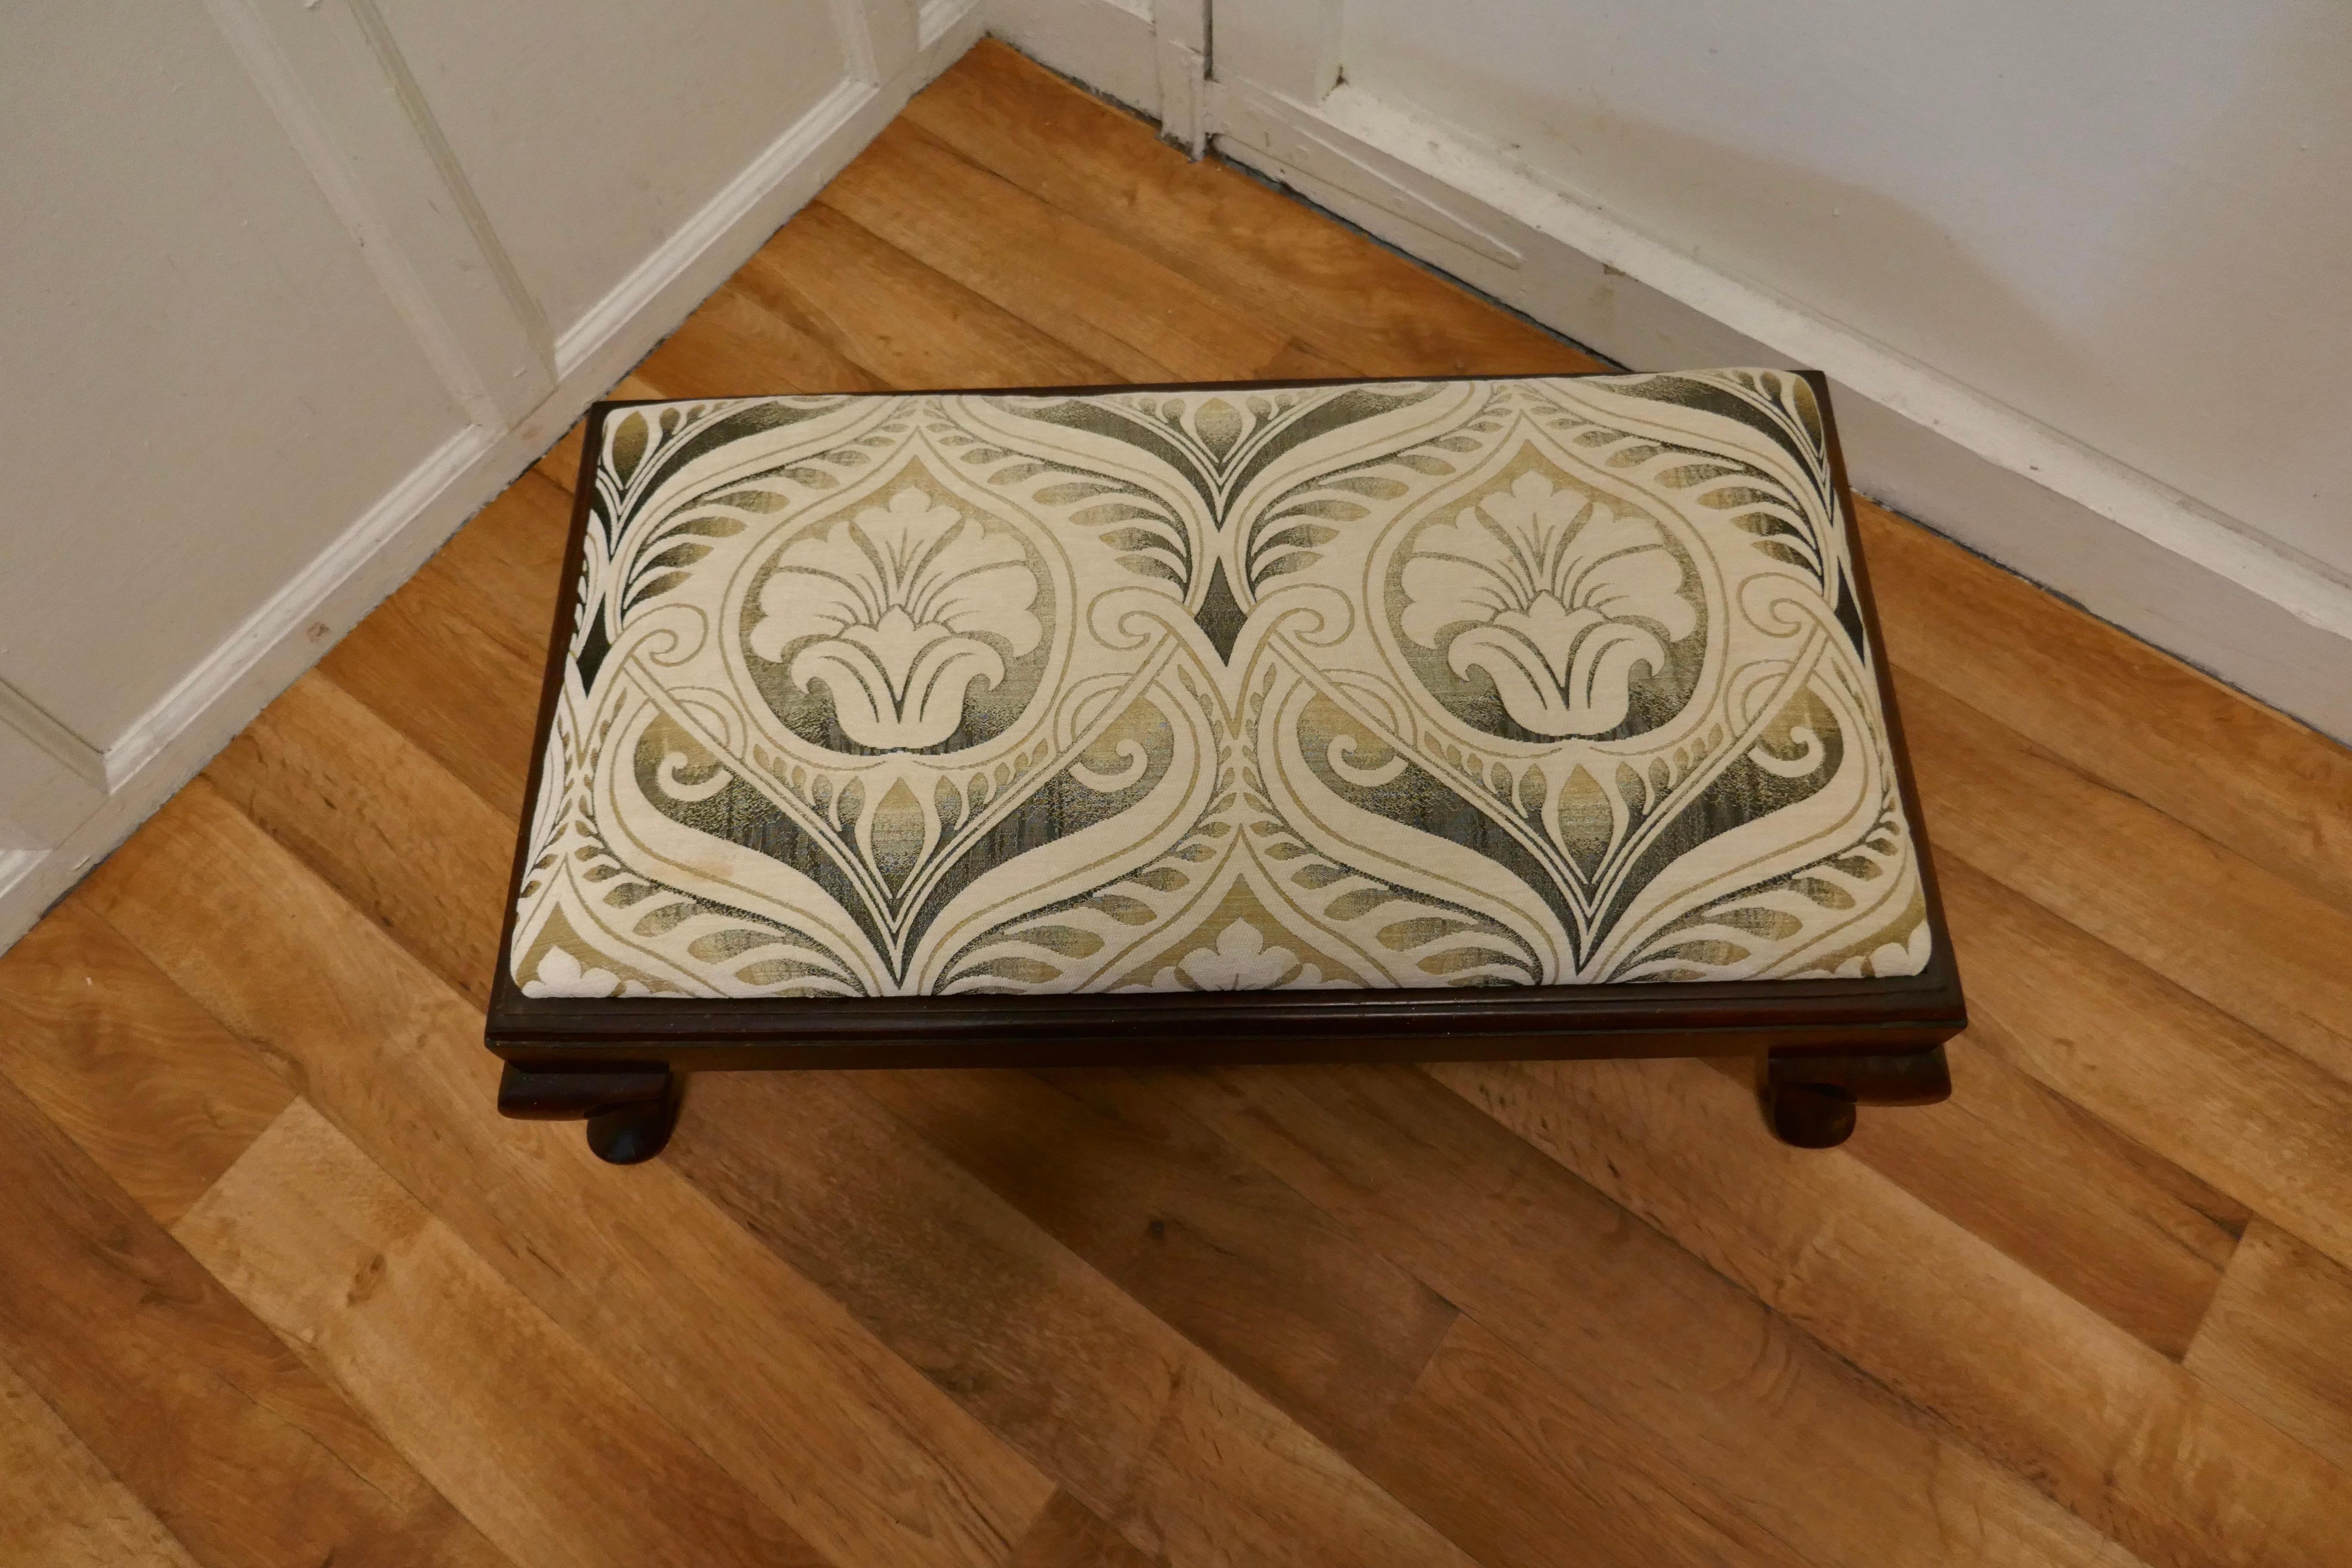 Arts and Crafts Style Upholstered Long Foot Stool 

A Lovely piece standing on Cabriole legs and the deep seat is upholstered in a stunning Arts and Crafts style designer fabric detailed in velvet and shimmering pearlescent thread

The stool is